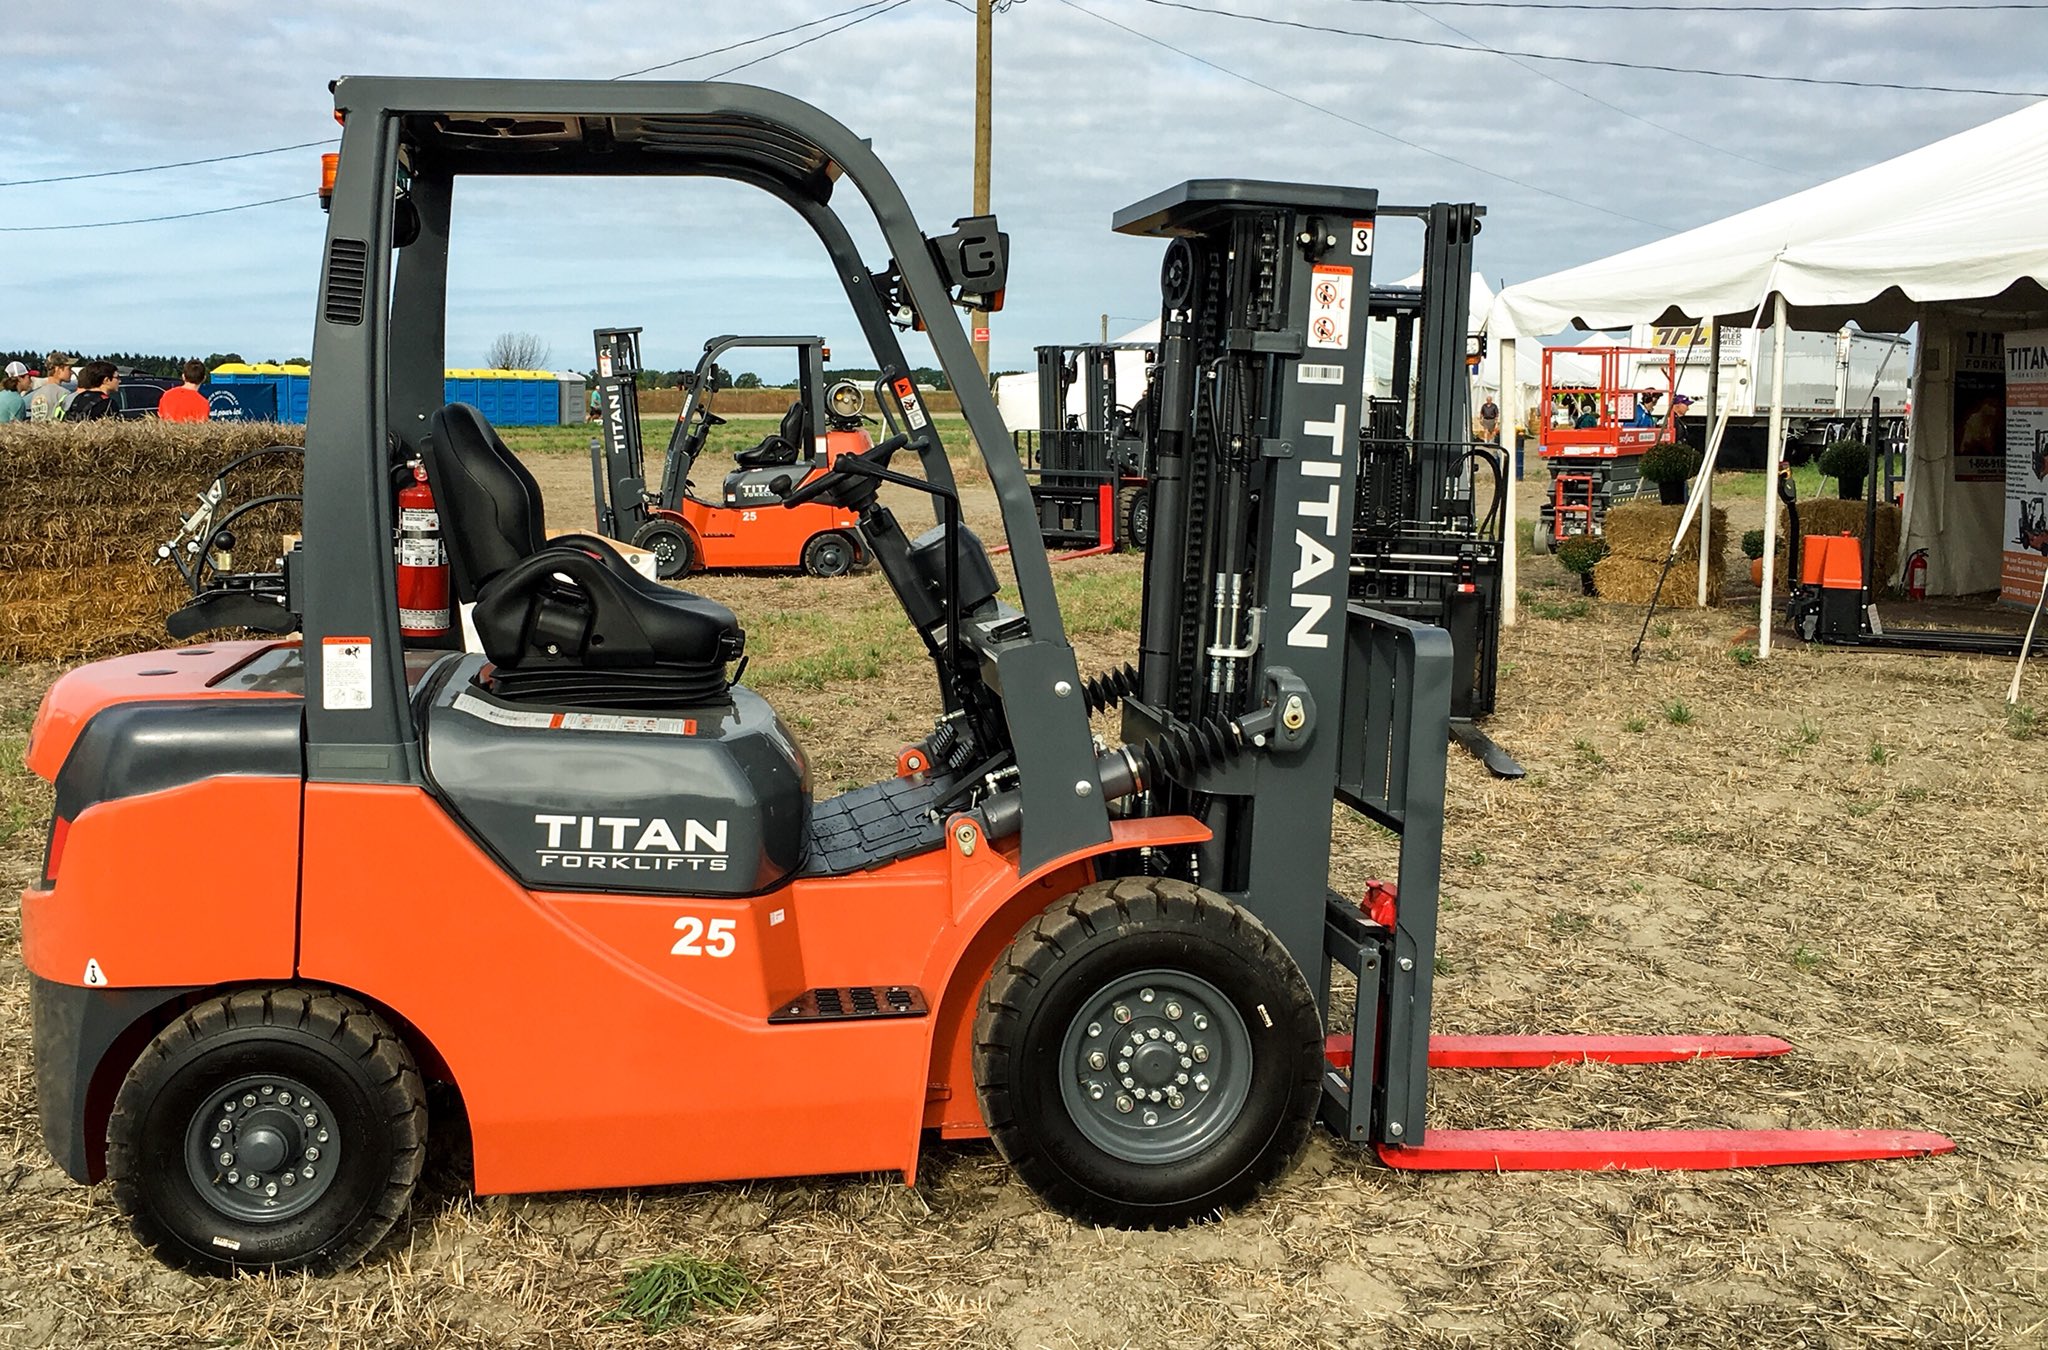 Farms Com Ontario Ag A Twitter Titan Forklifts Is At The 2018 International Plowing Match Stop By Their Local Dealer At 987 Richmond Street Here In Chatham For All Your Custom Forklift Needs